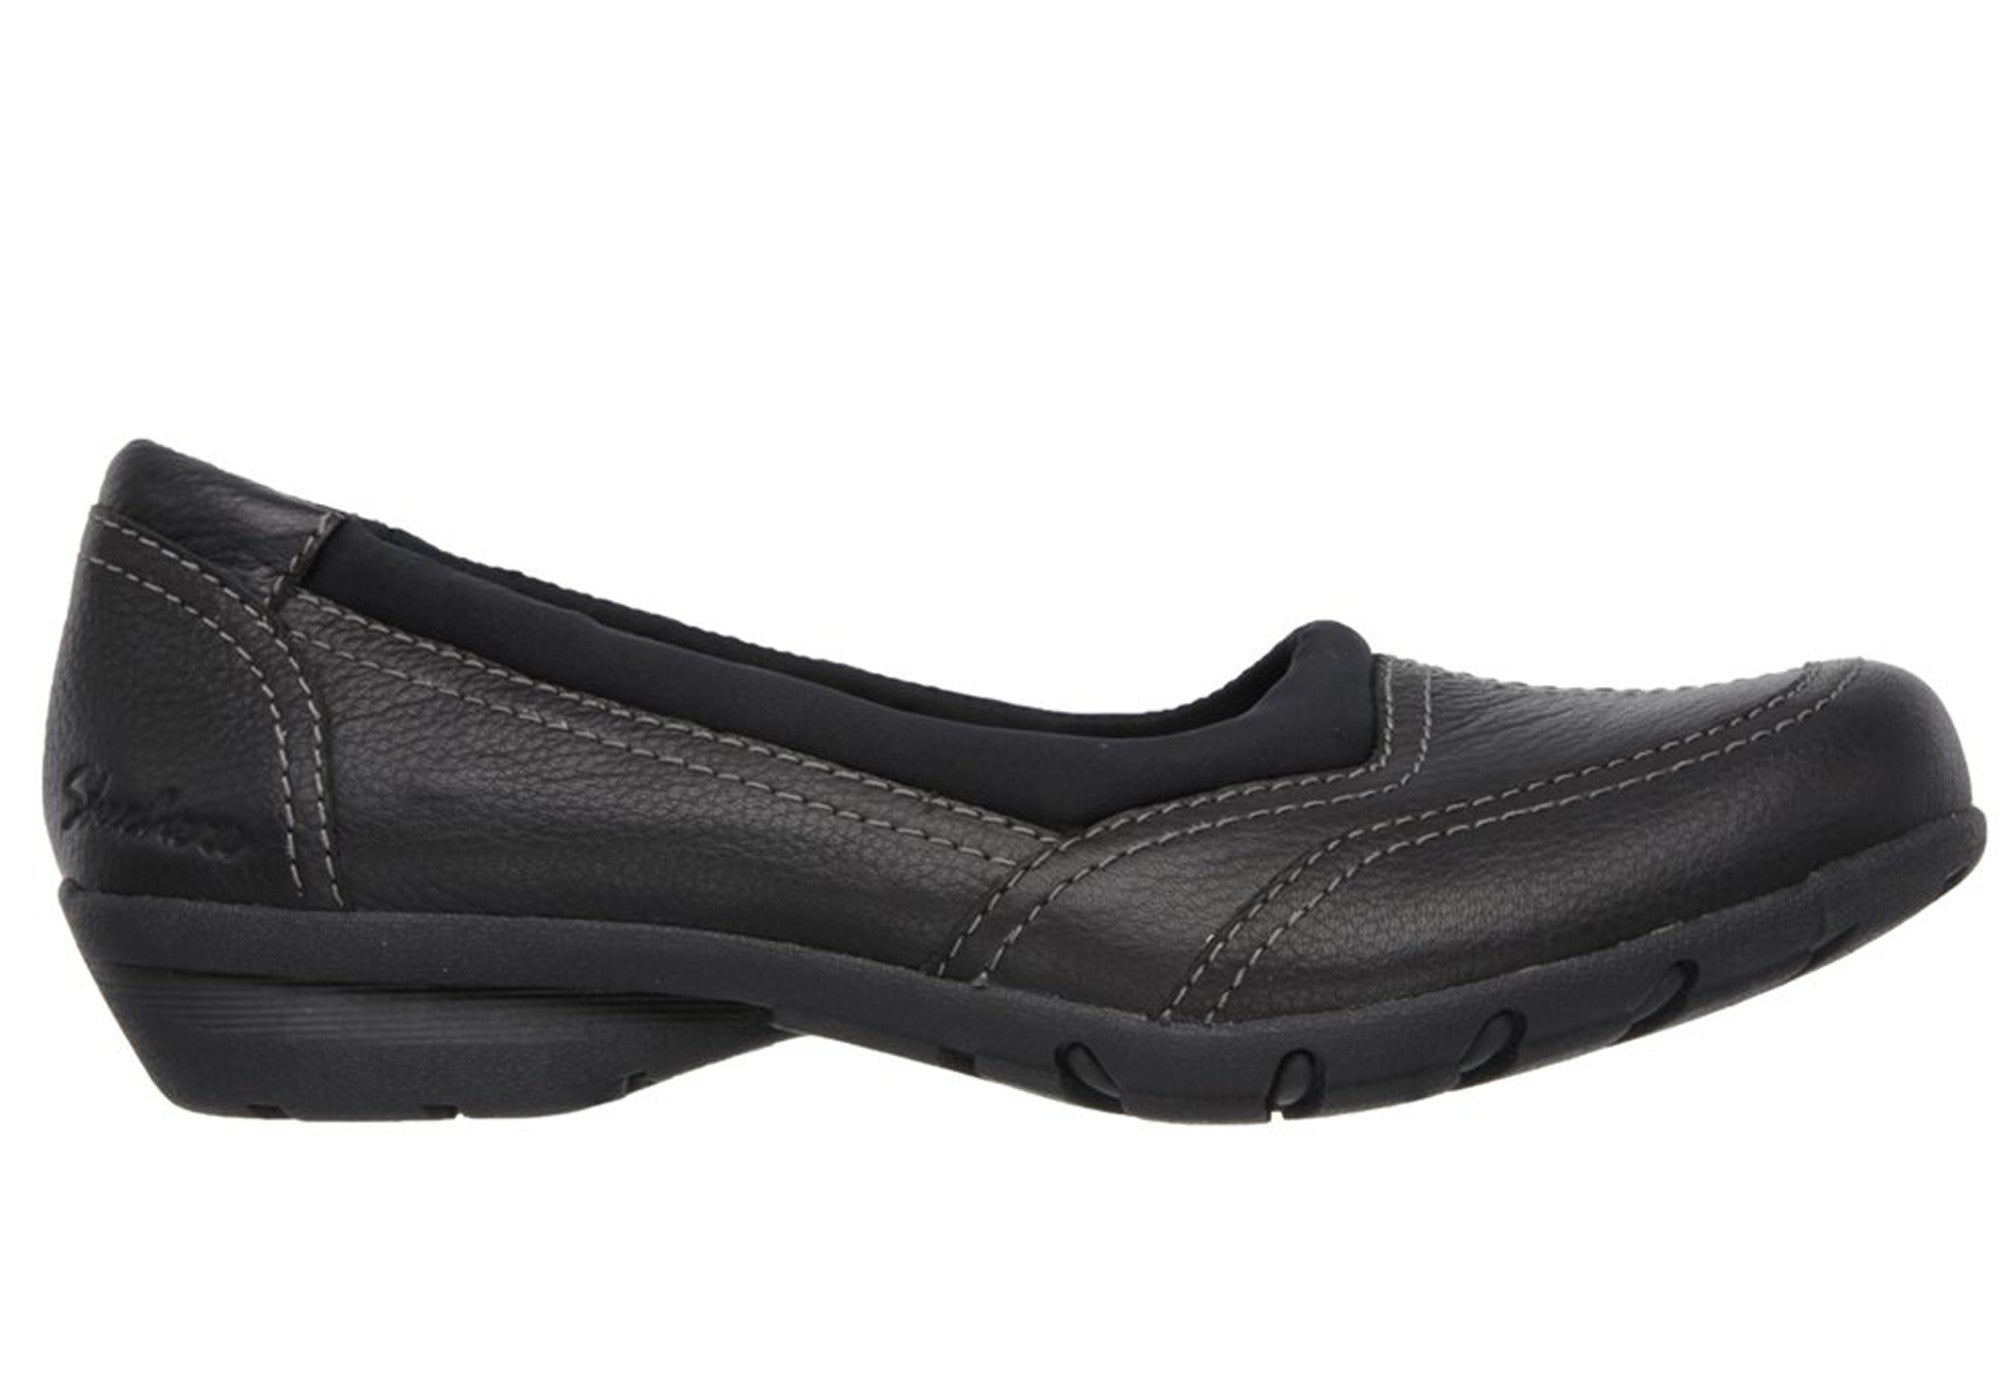 skechers ladies leather shoes